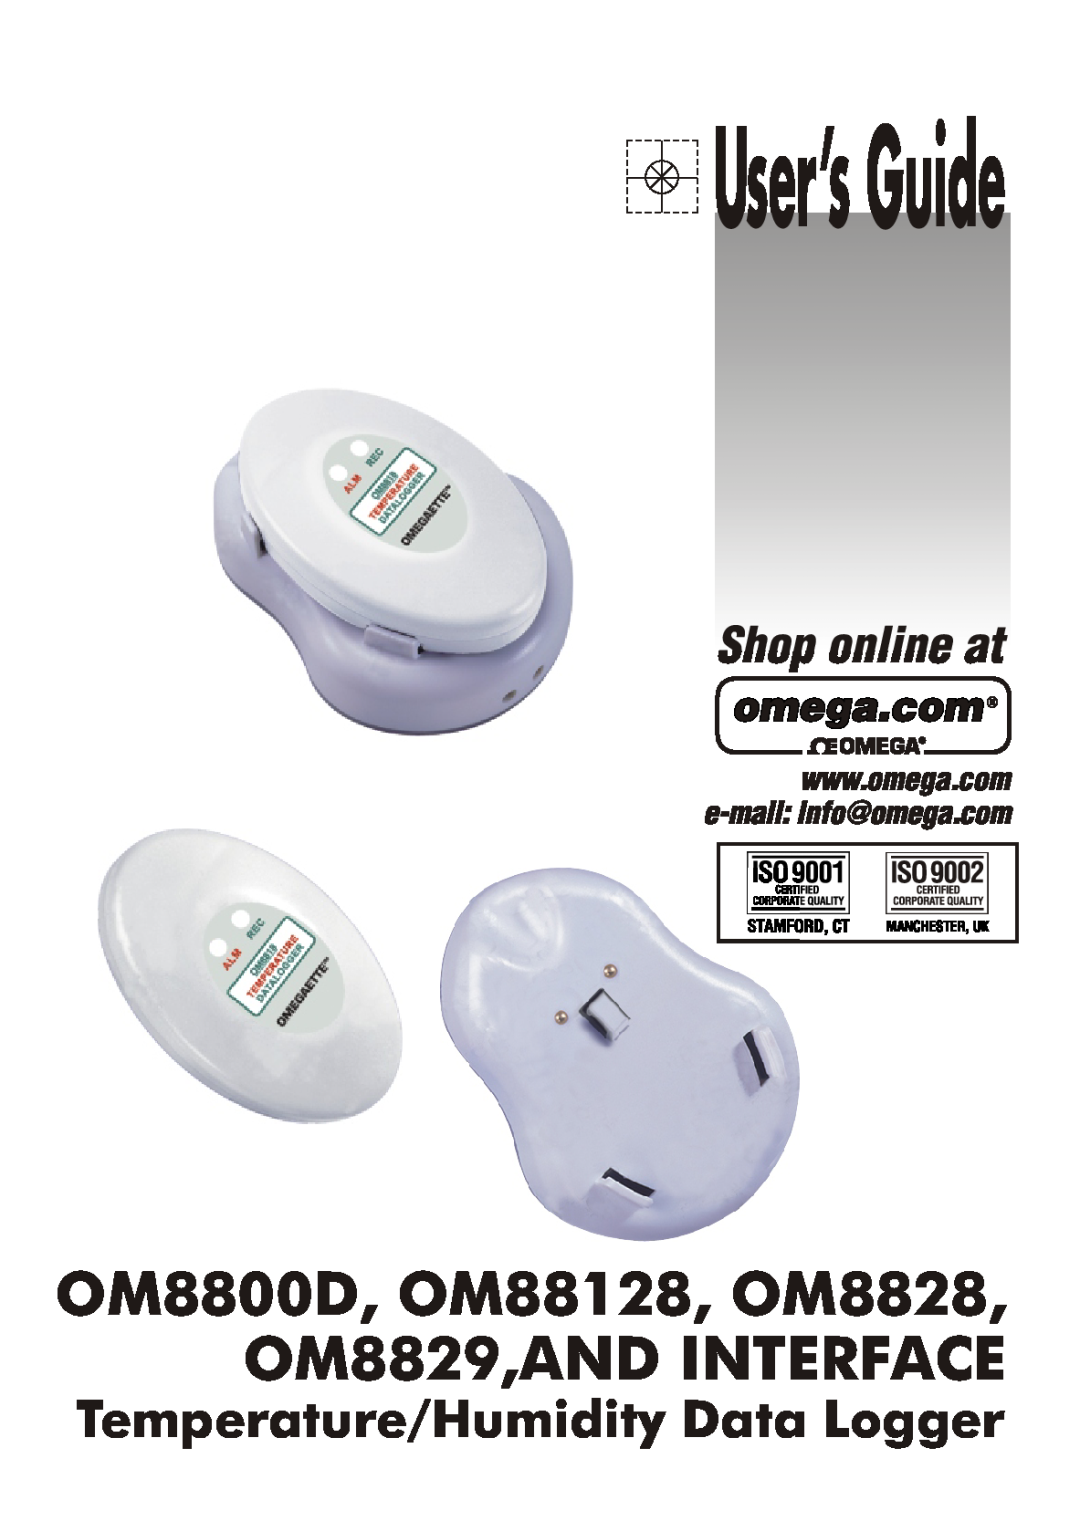 Omega Engineering manual OM8800D, OM88128, OM8828, OM8829,AND INTERFACE, Temperature/Humidity Data Logger 